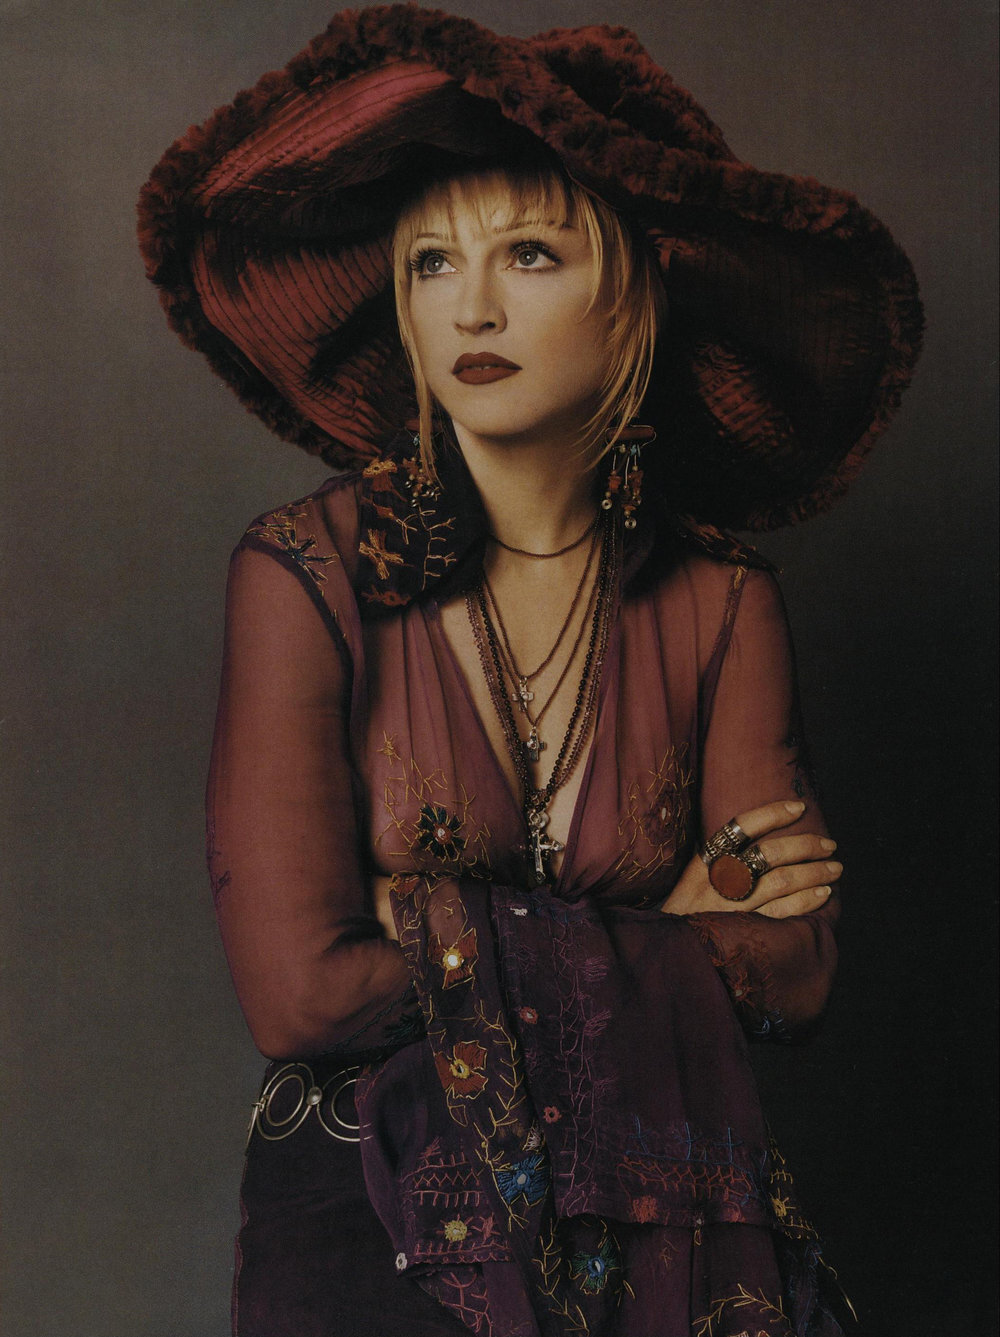 Madonna in Anna Sui. Photo by Steven Meisel for Vogue, October 1992.